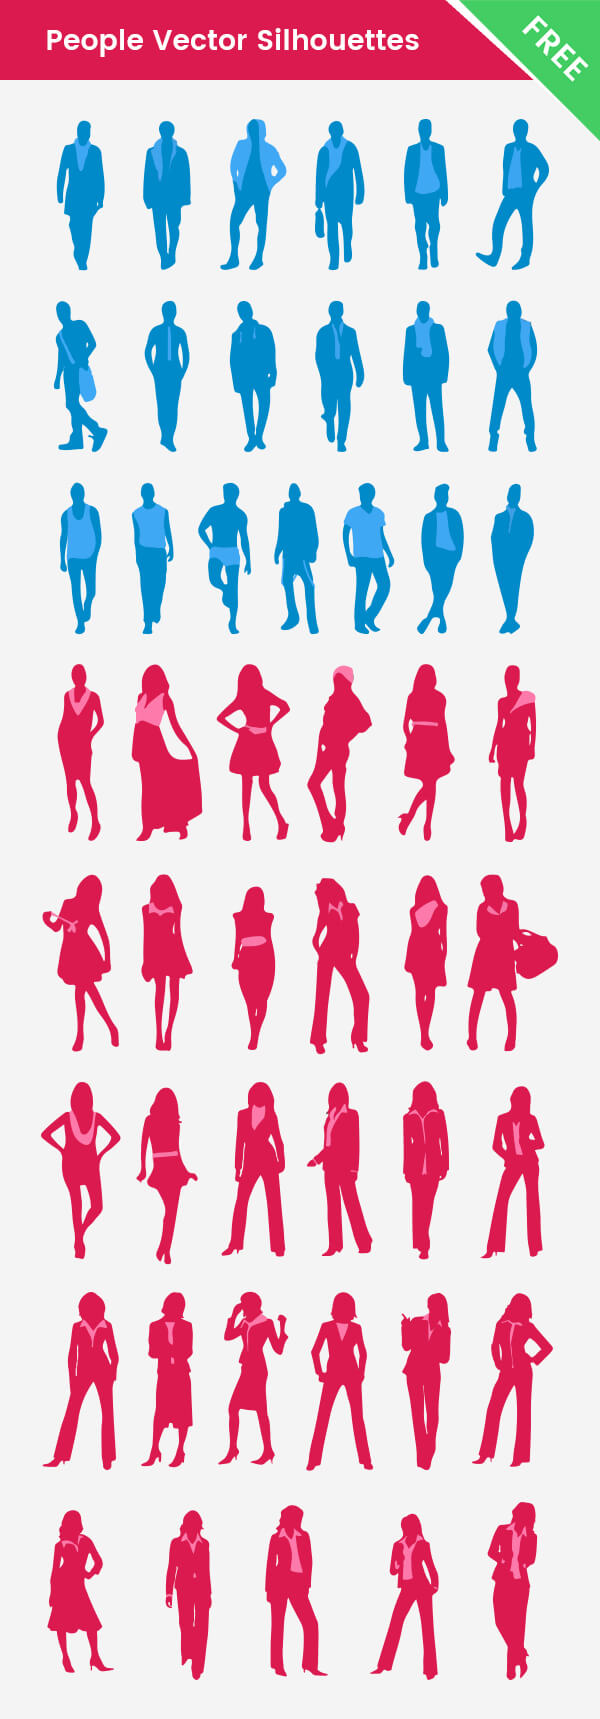 People Vector Silhouettes